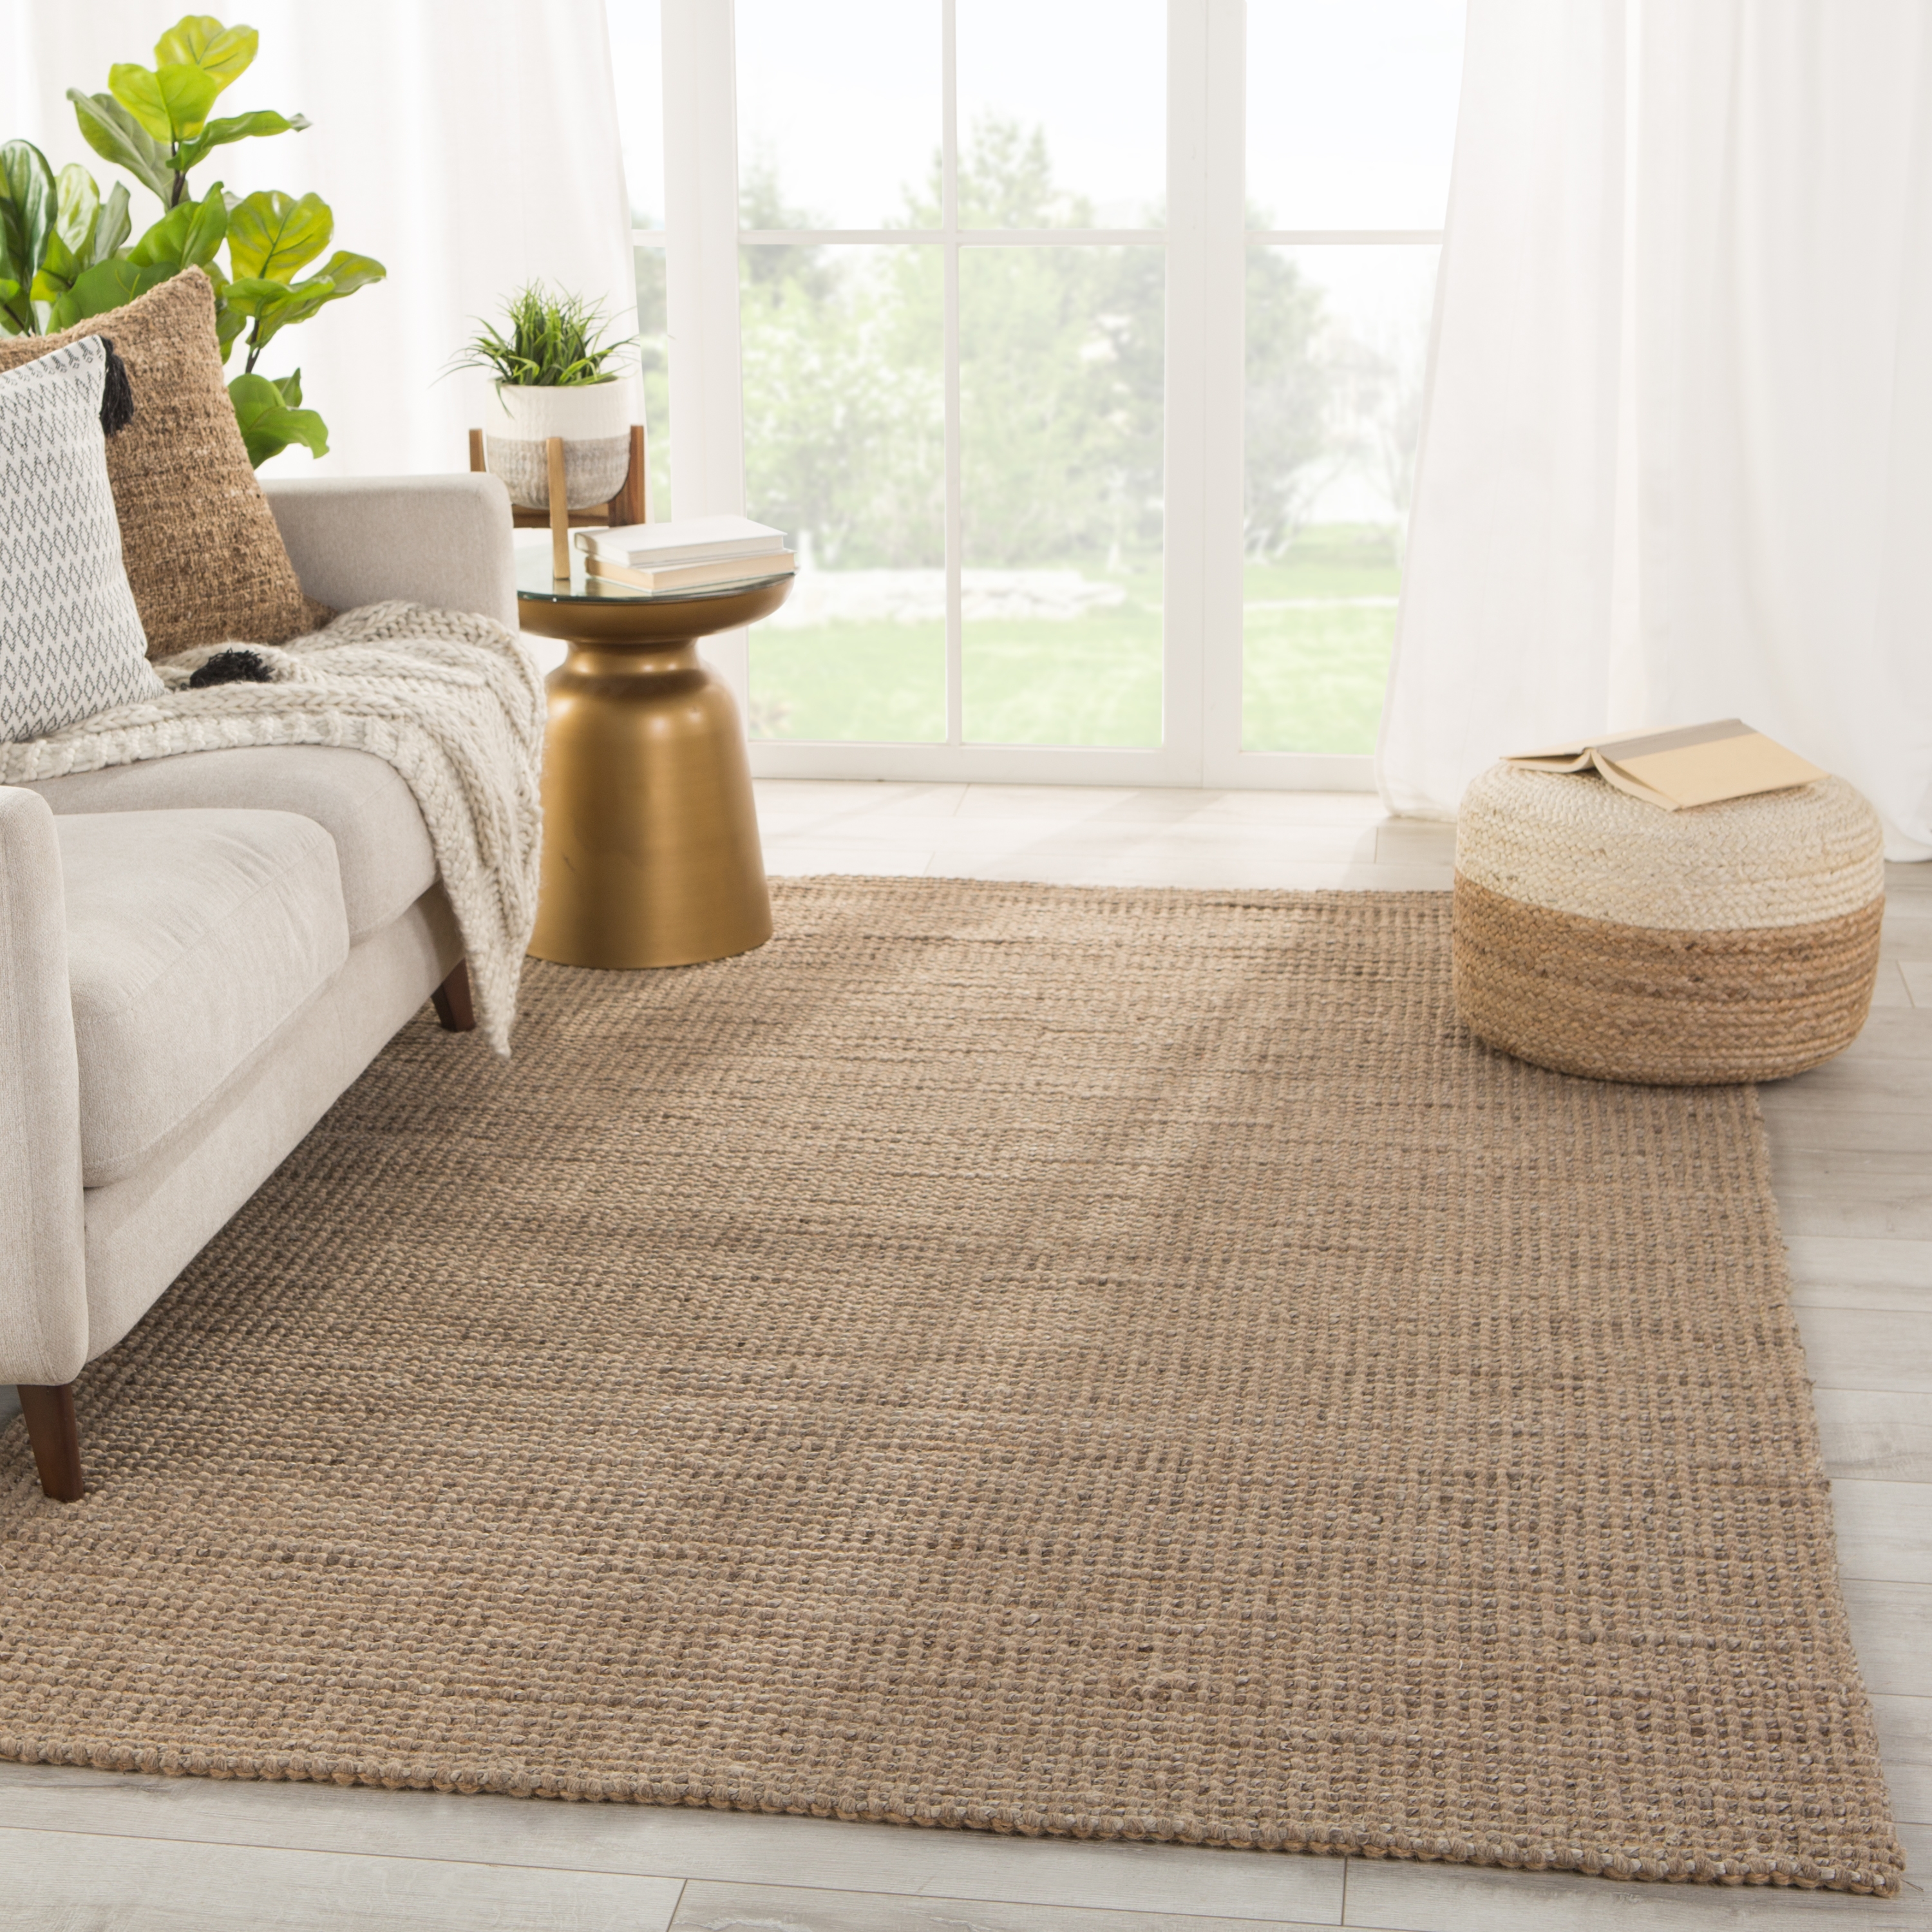 Beech Natural Solid Tan/ Taupe Area Rug (9'X12') - Image 4